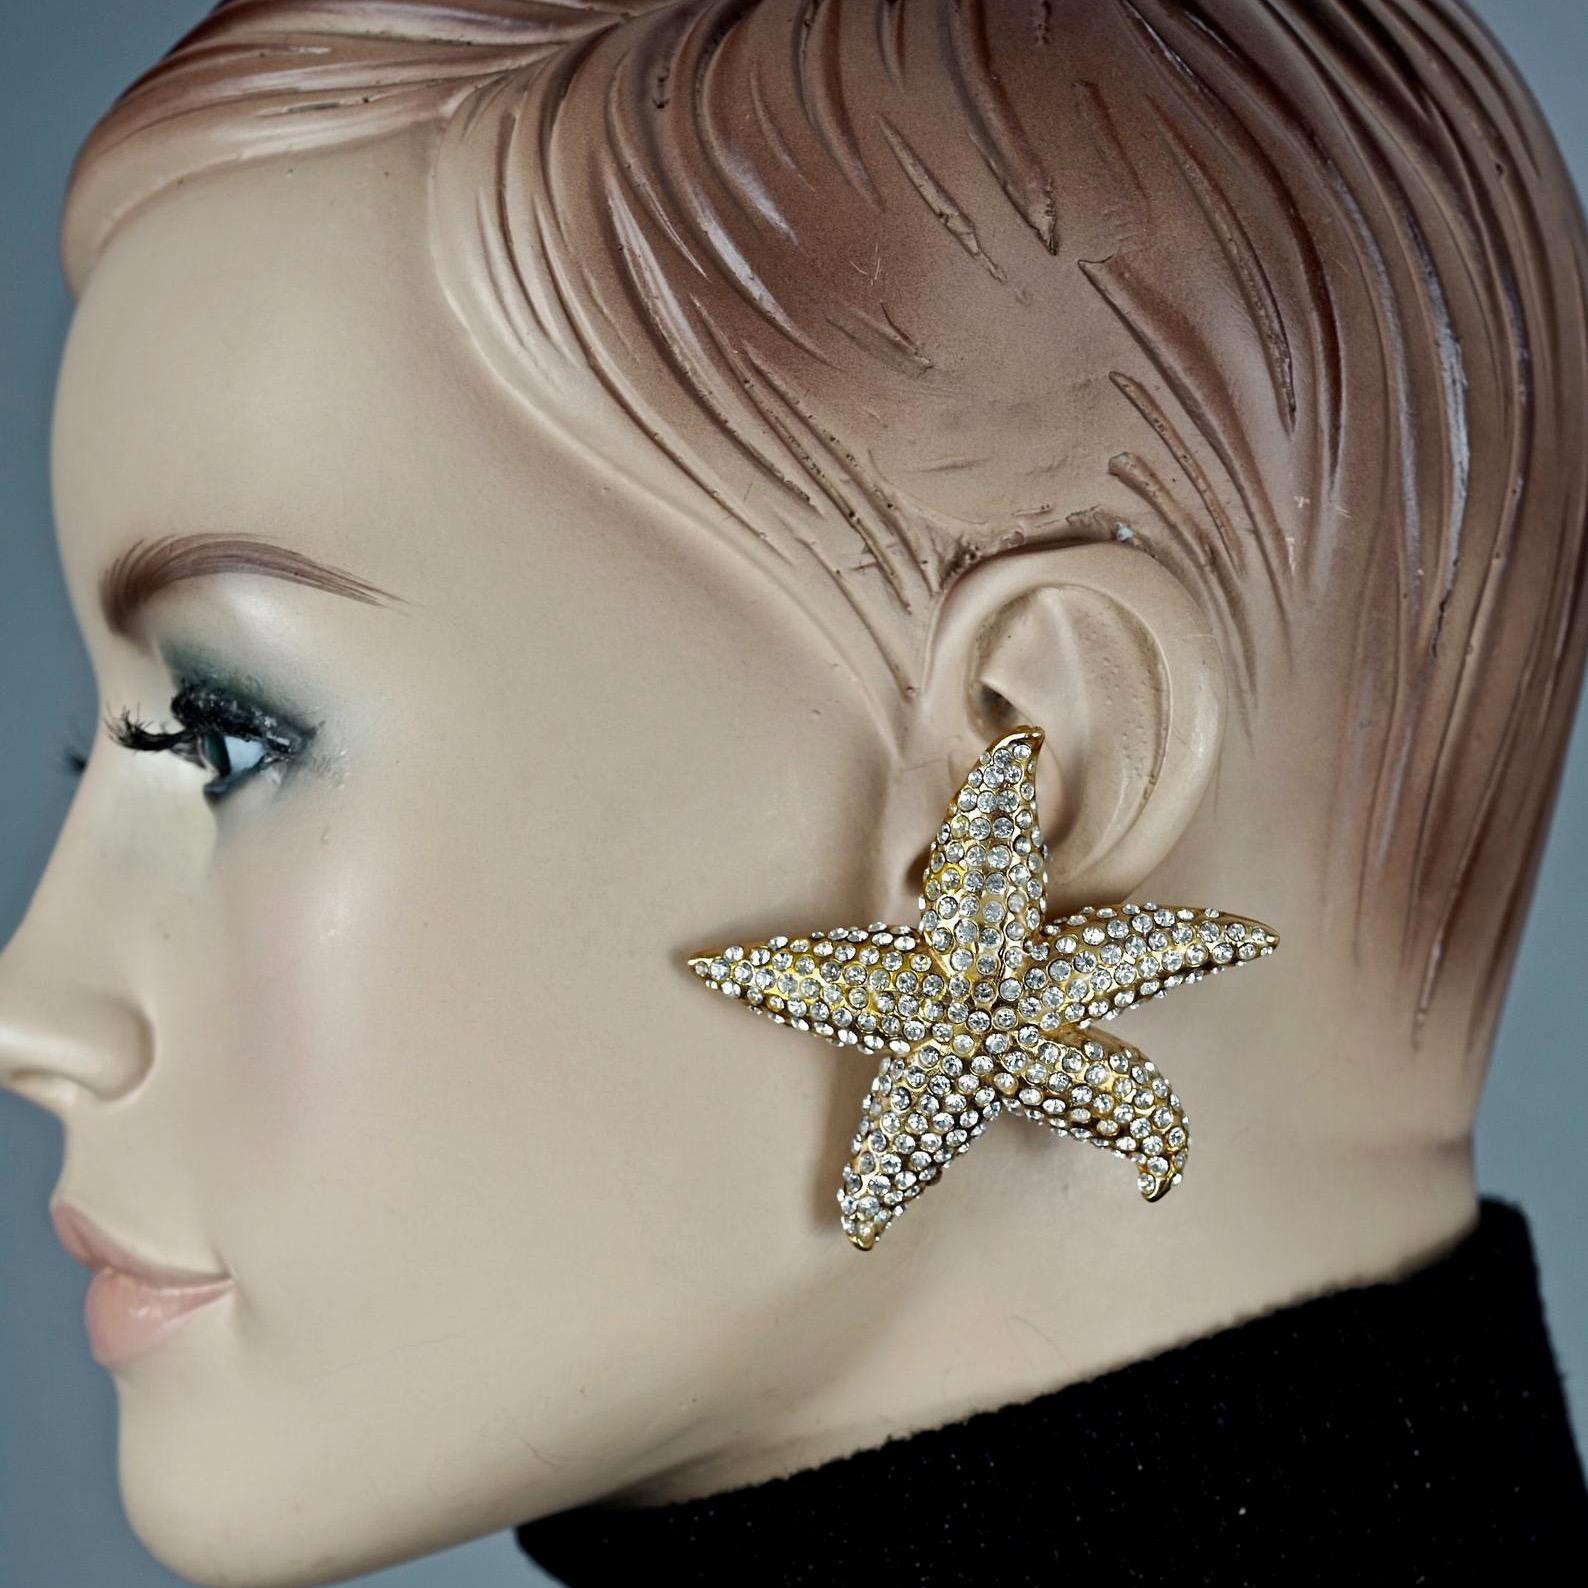 Vintage Lanvin Paris Star Fish Rhinestone Earrings

MEASUREMENTS:
Height: 2.36 inches (6 cm)
Width: 2.36 inches (6 cm)
Weight per Earring: 26 grams

Features:
- 100% Authentic LANVIN.
- Huge earrings in star fish form.
- Studded with clear